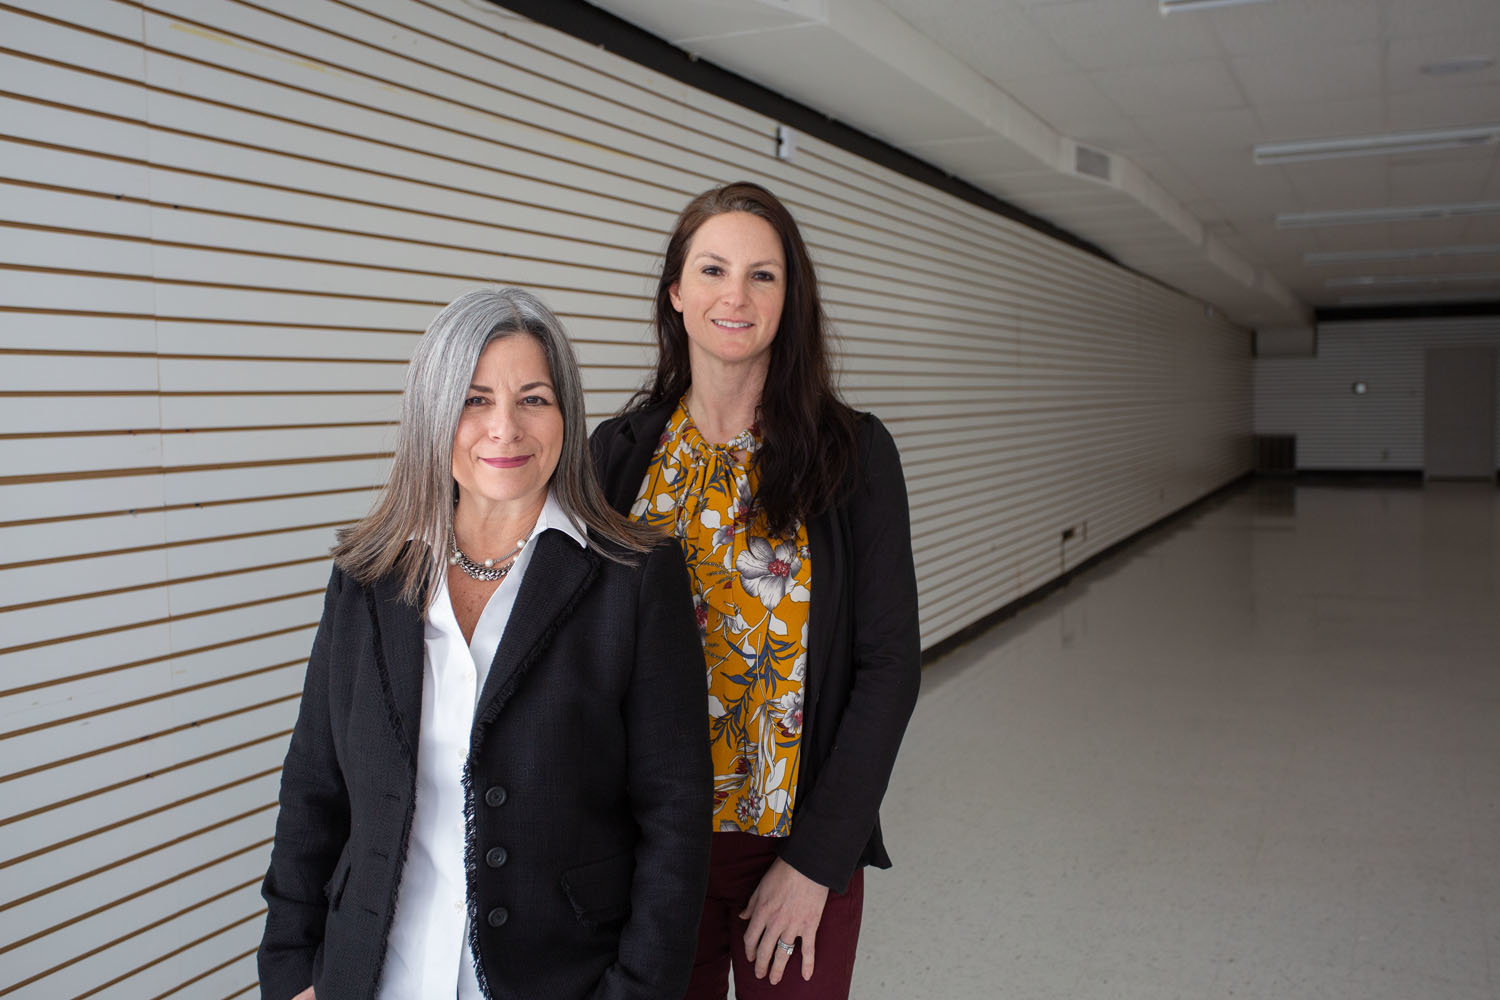 LICENSE FOR WEED: Mo Retail Products Group, represented by Nancy Price, left, and Julie Belk, plans to open a dispensary in the Plaza Shopping Center.